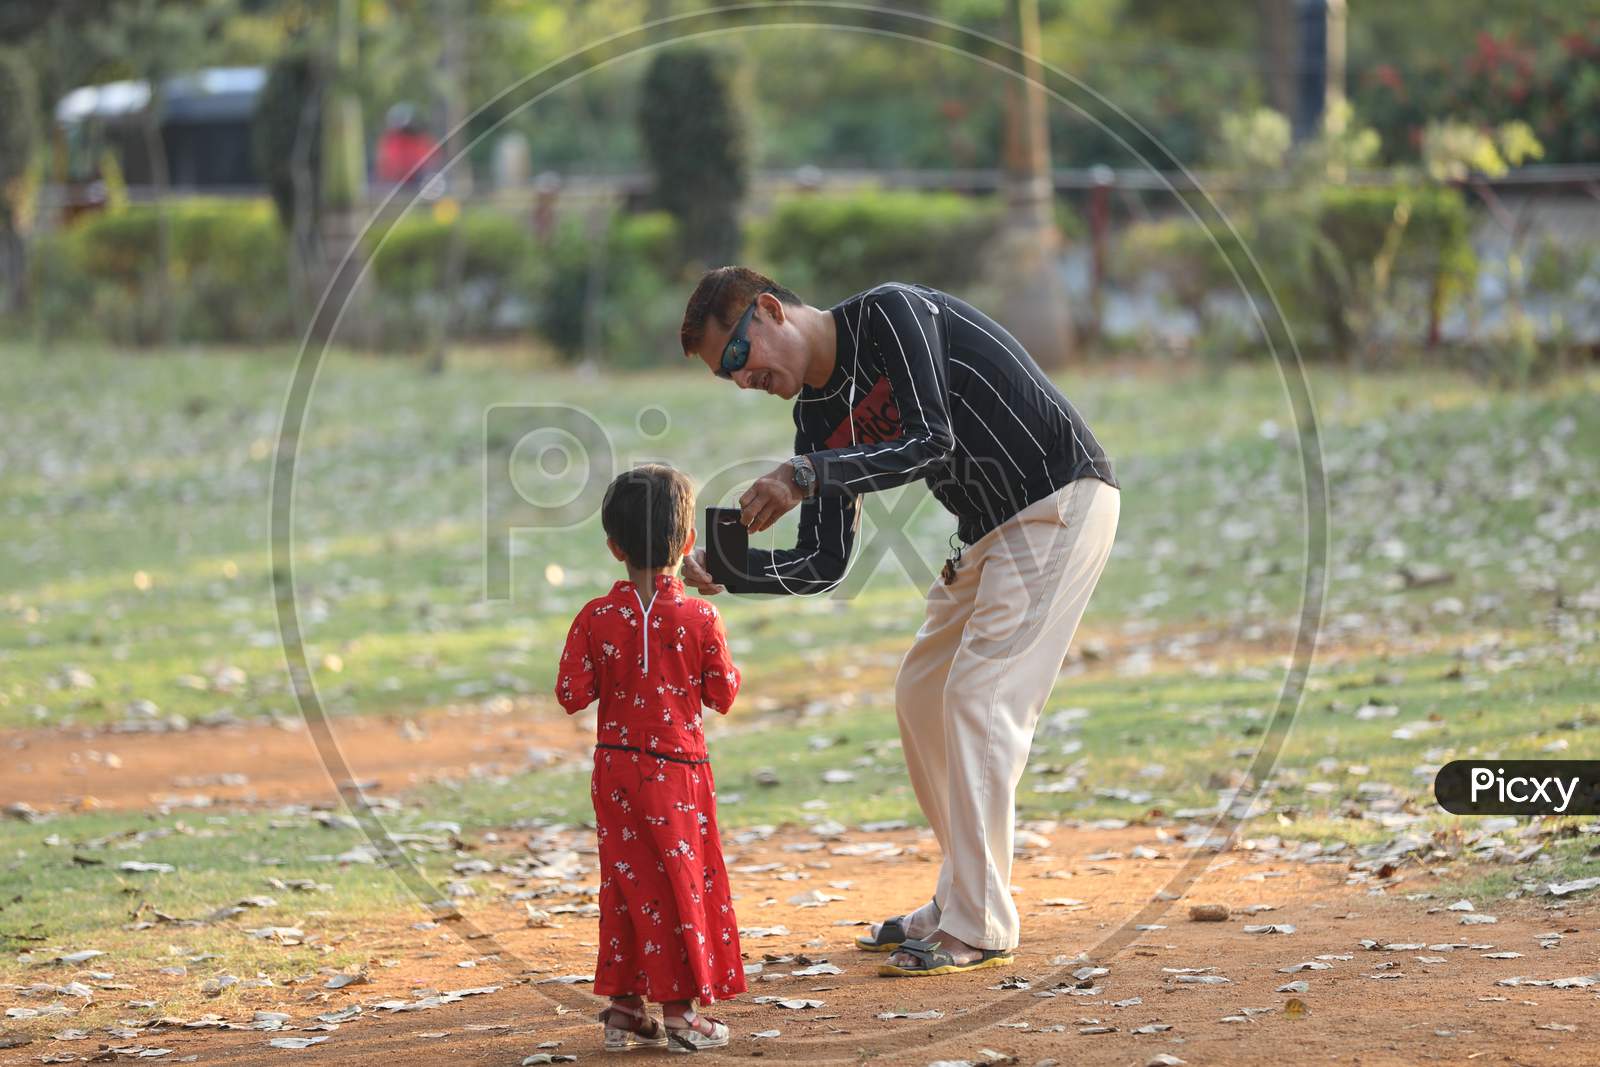 A Father Taking Picture Of A Girl Child in an Park